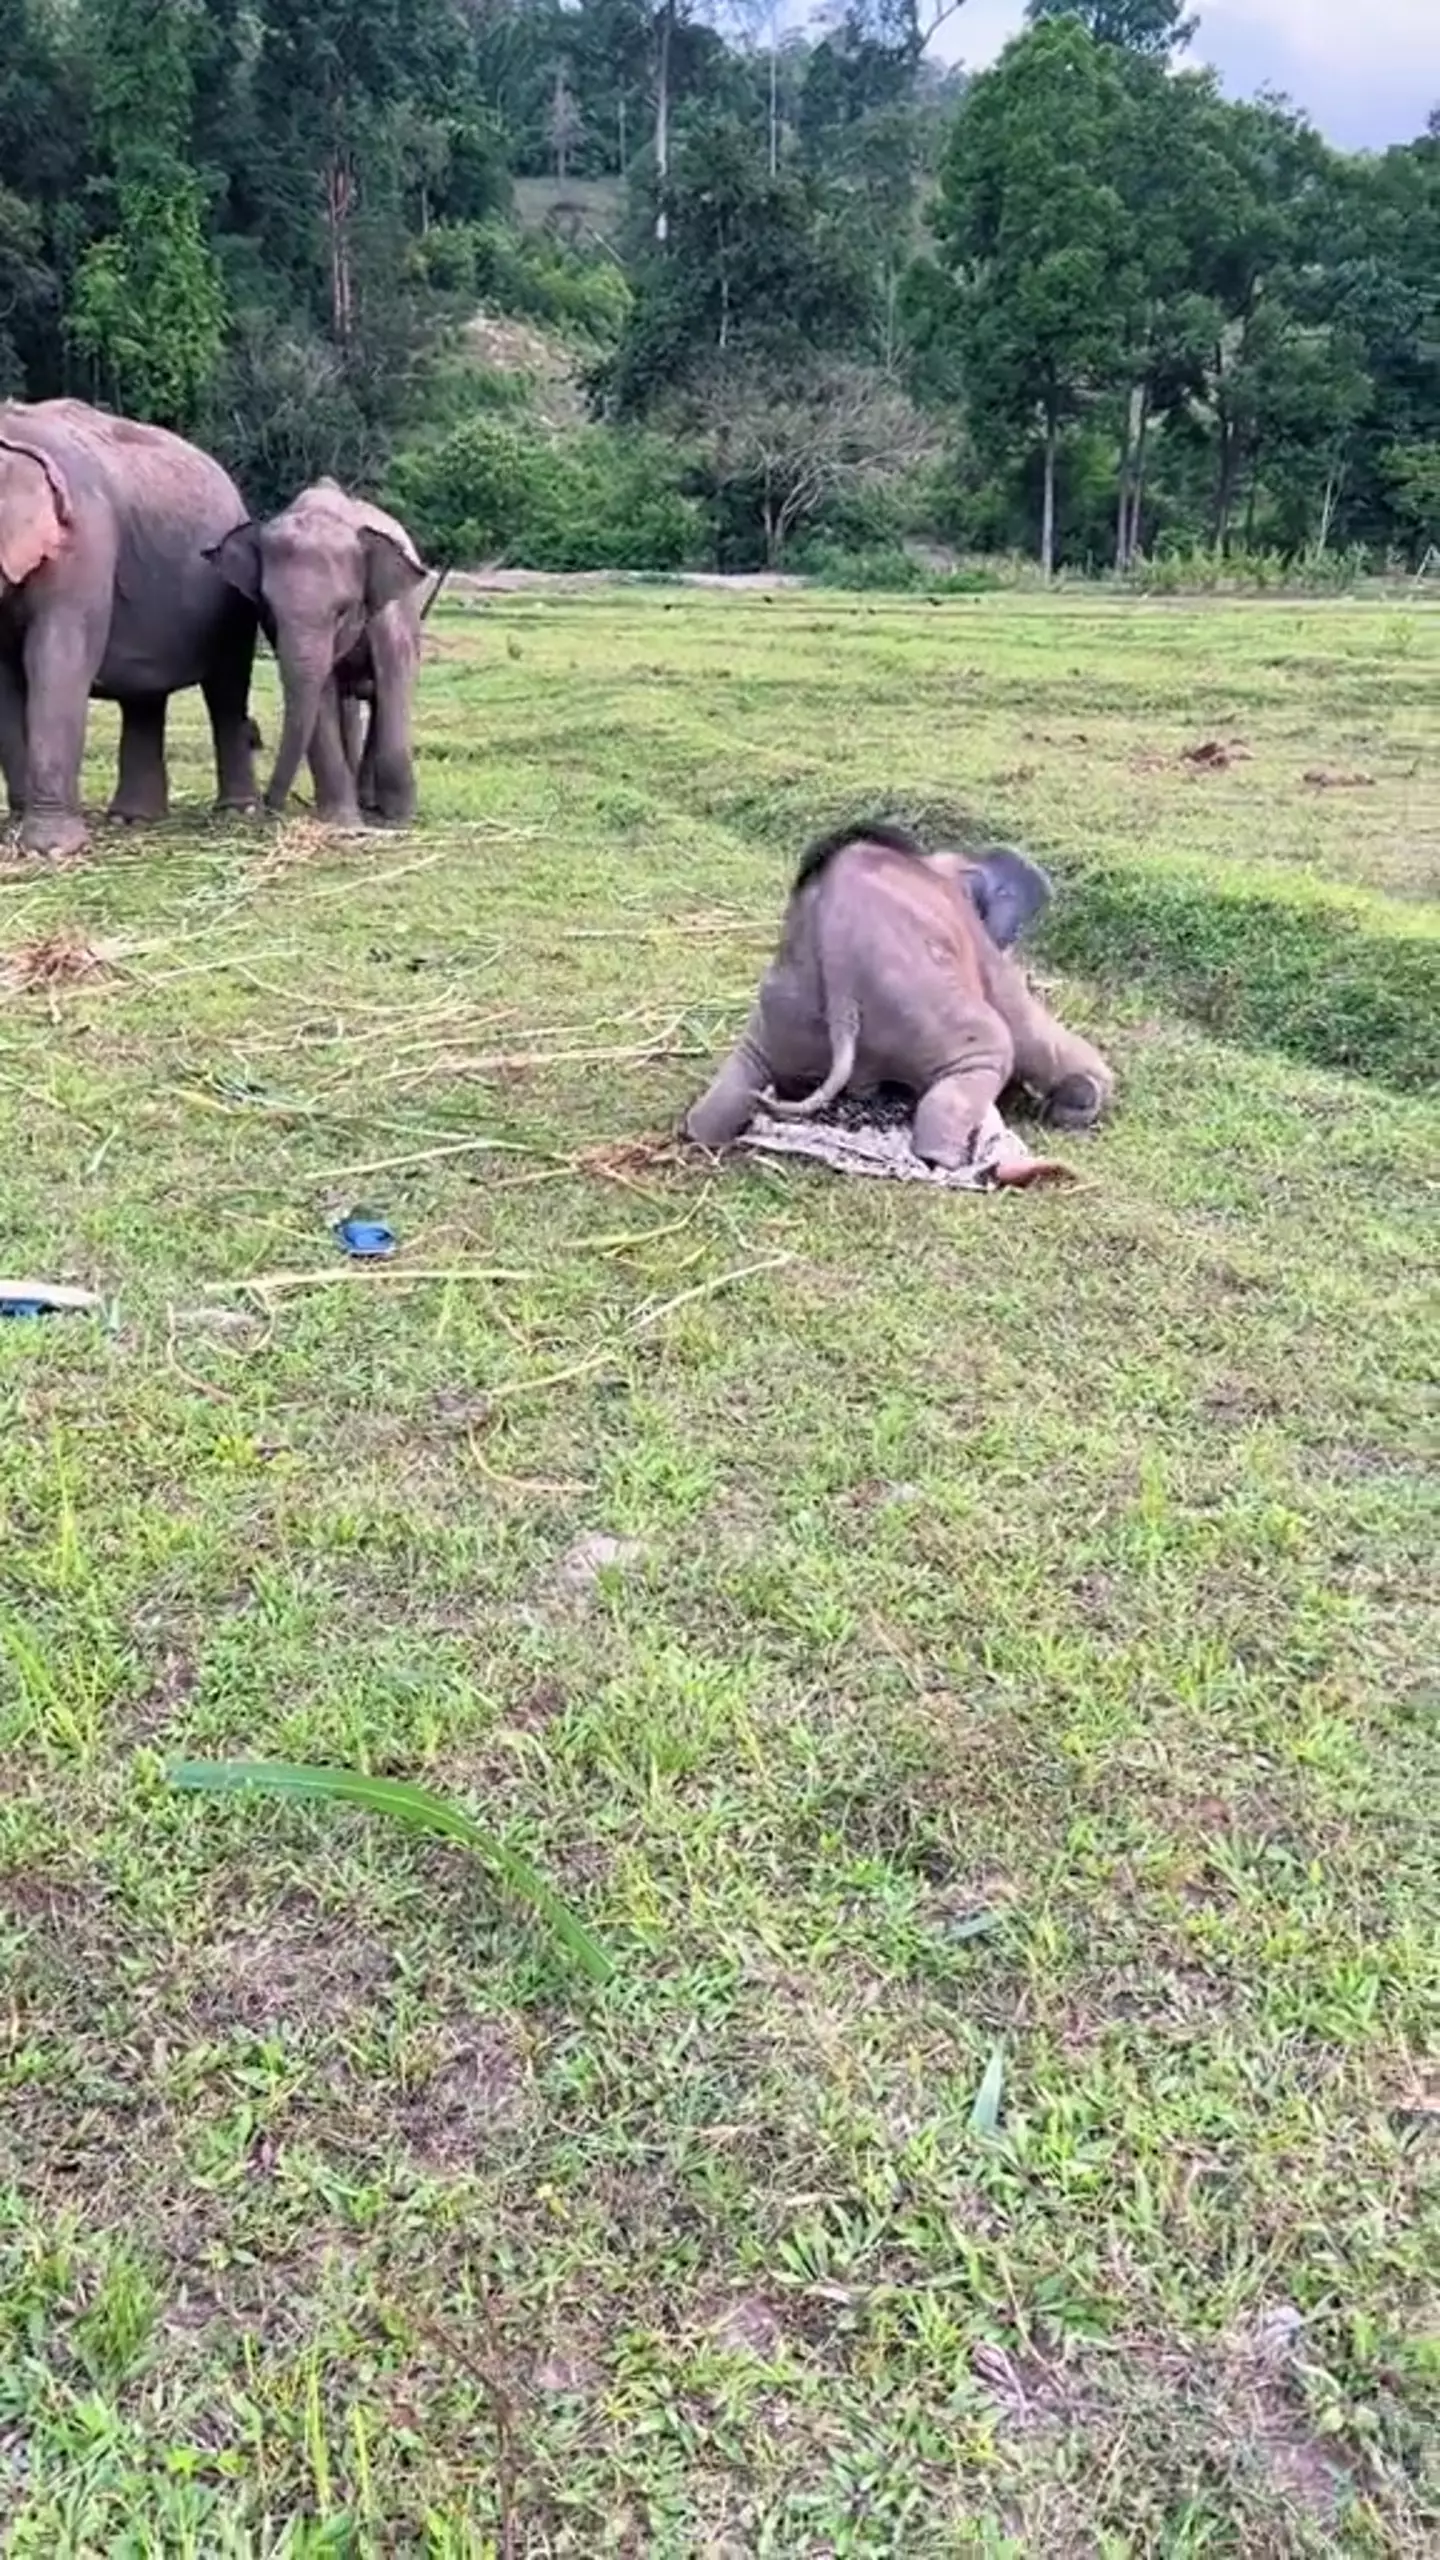 People suggested the elephant wanted to do a bit more than just play.